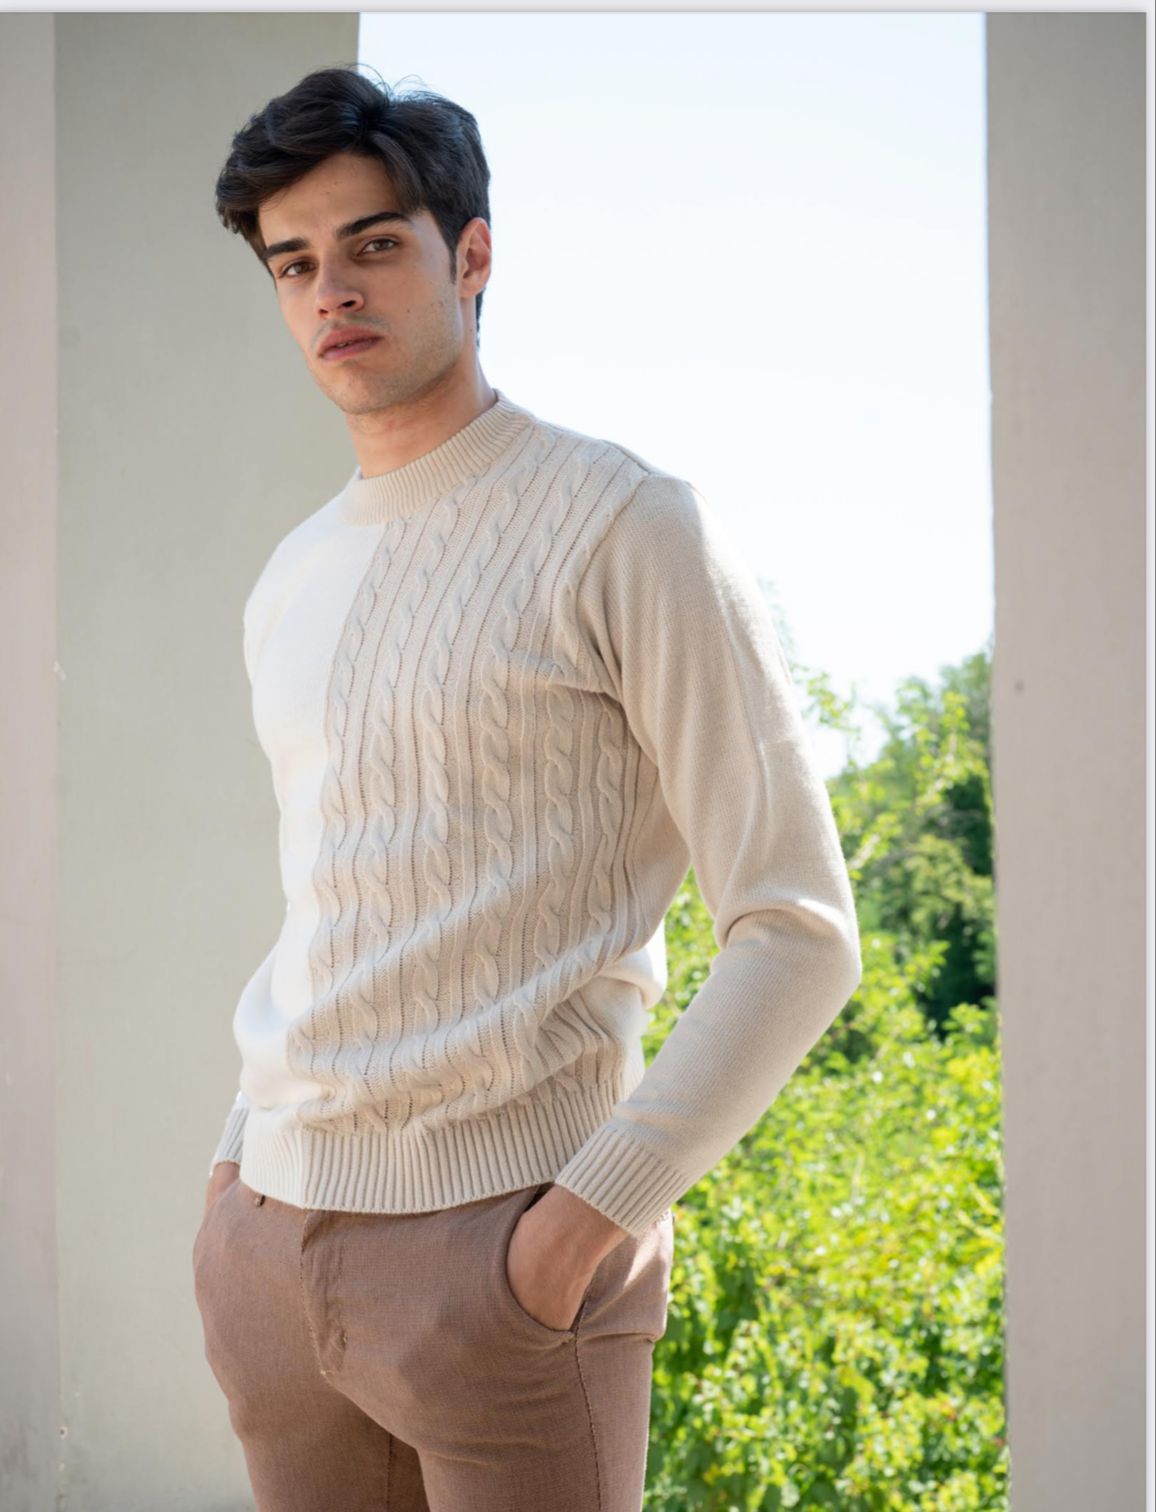 Men's Fashion Sweater Manuel Garcia - Men's Clothing Outlet Made in Italy